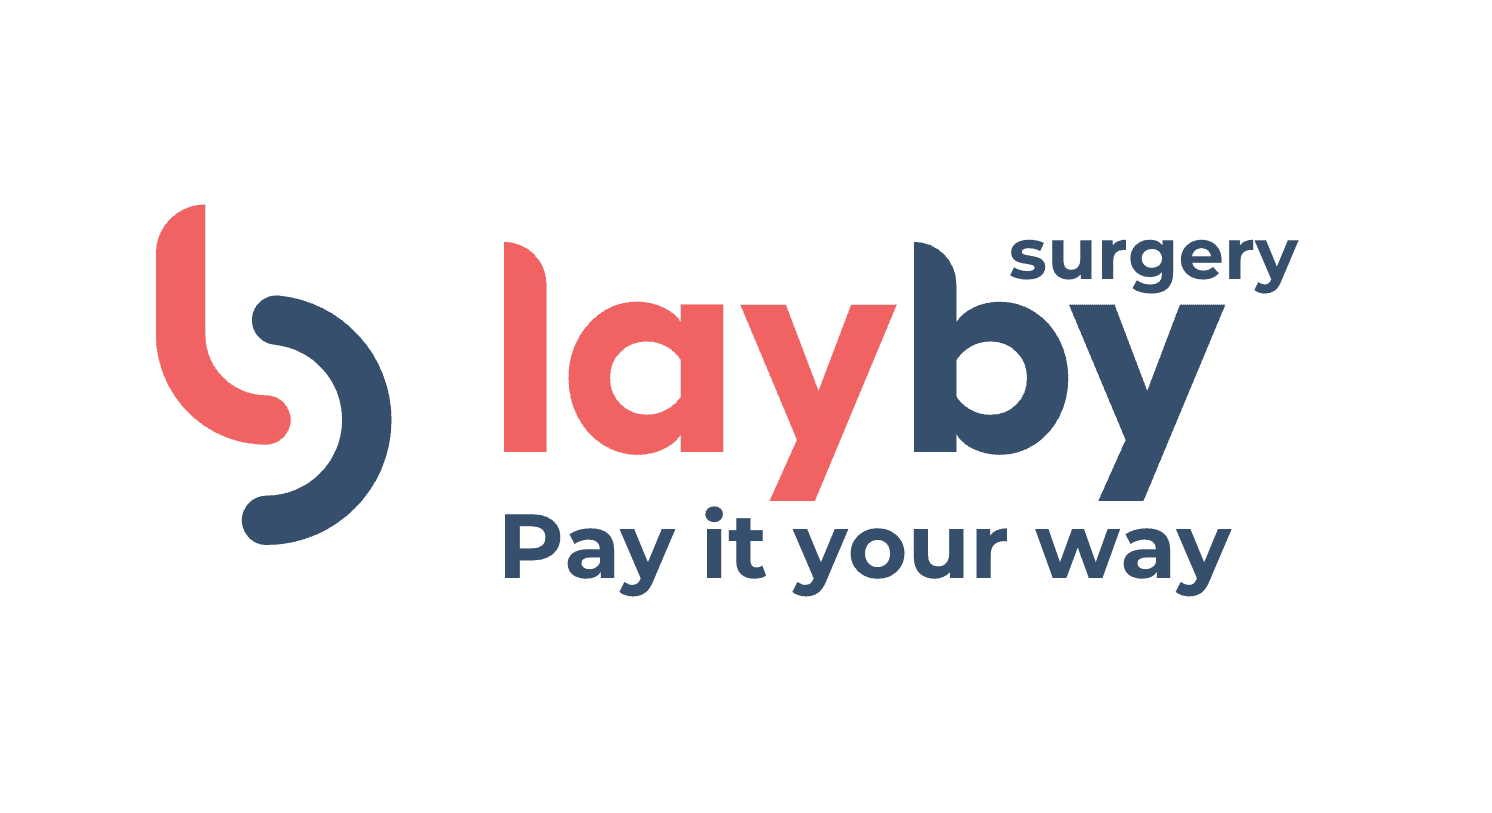 Layby surgery available at Self Pay Surgery